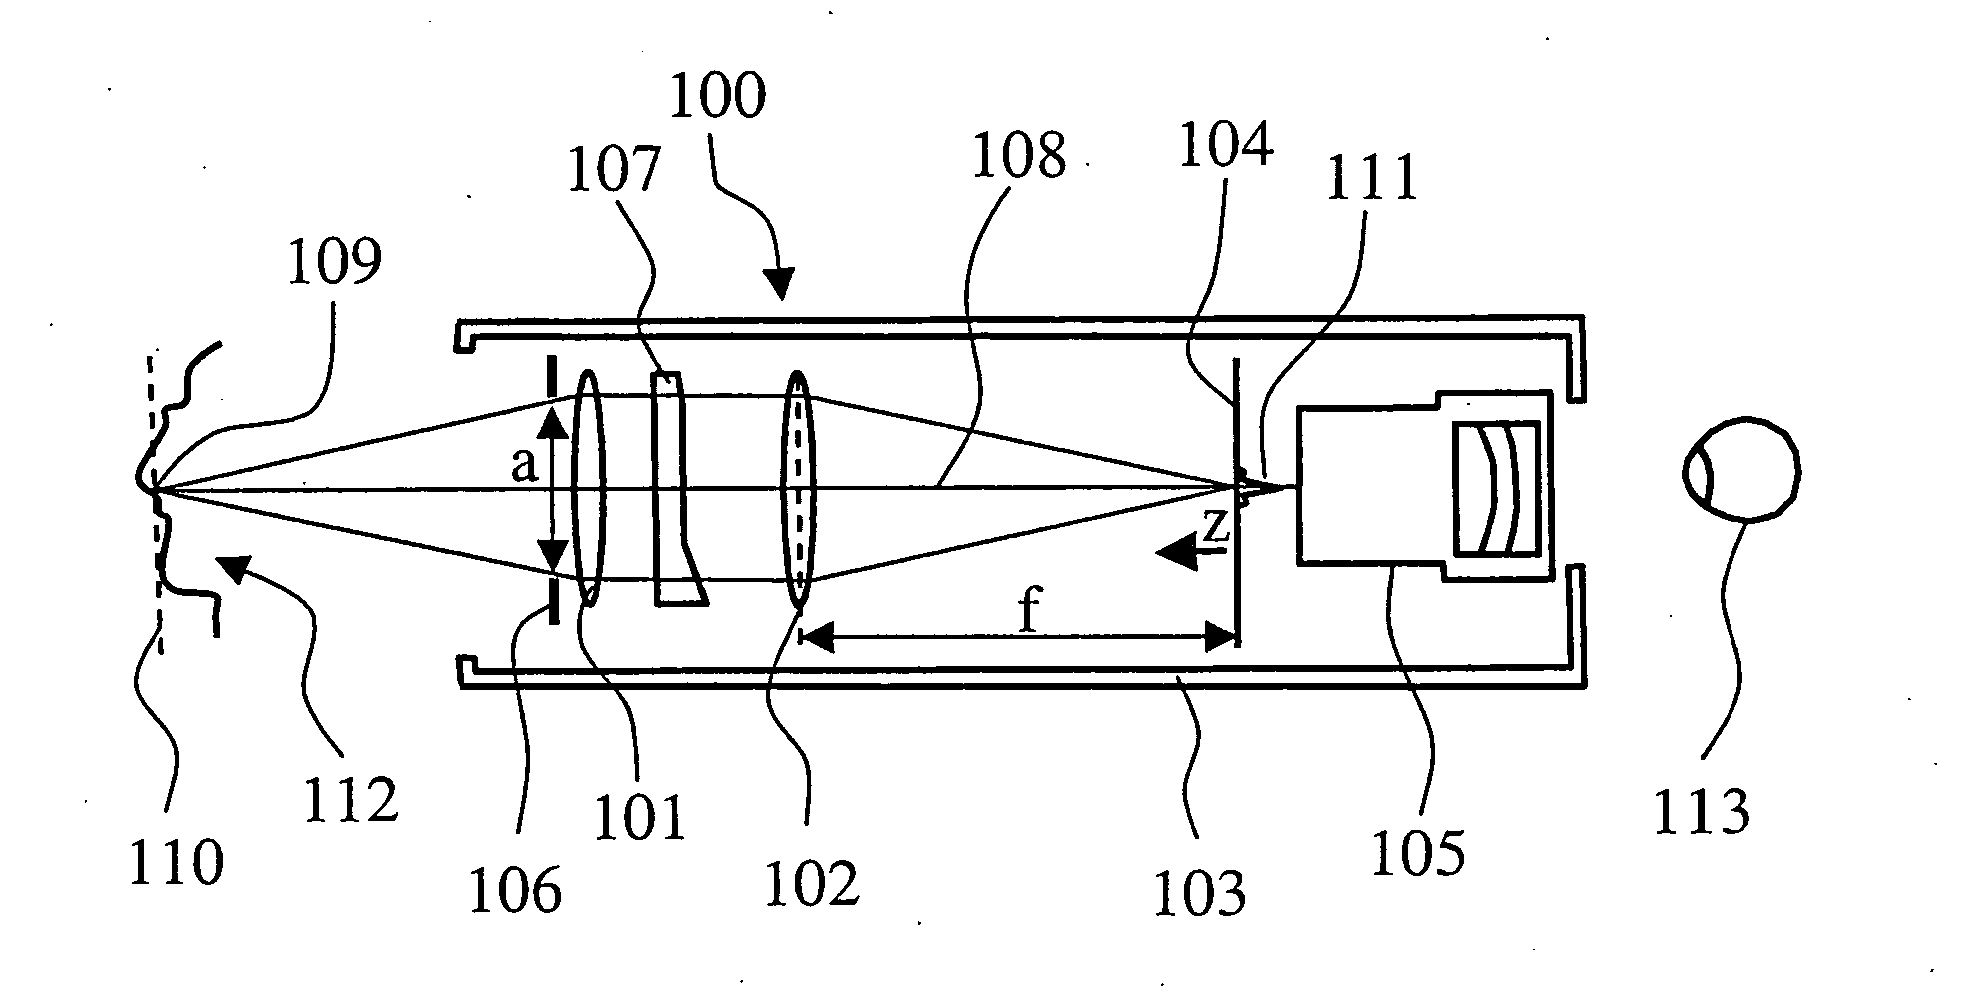 Optical imaging system having an expand depth of field